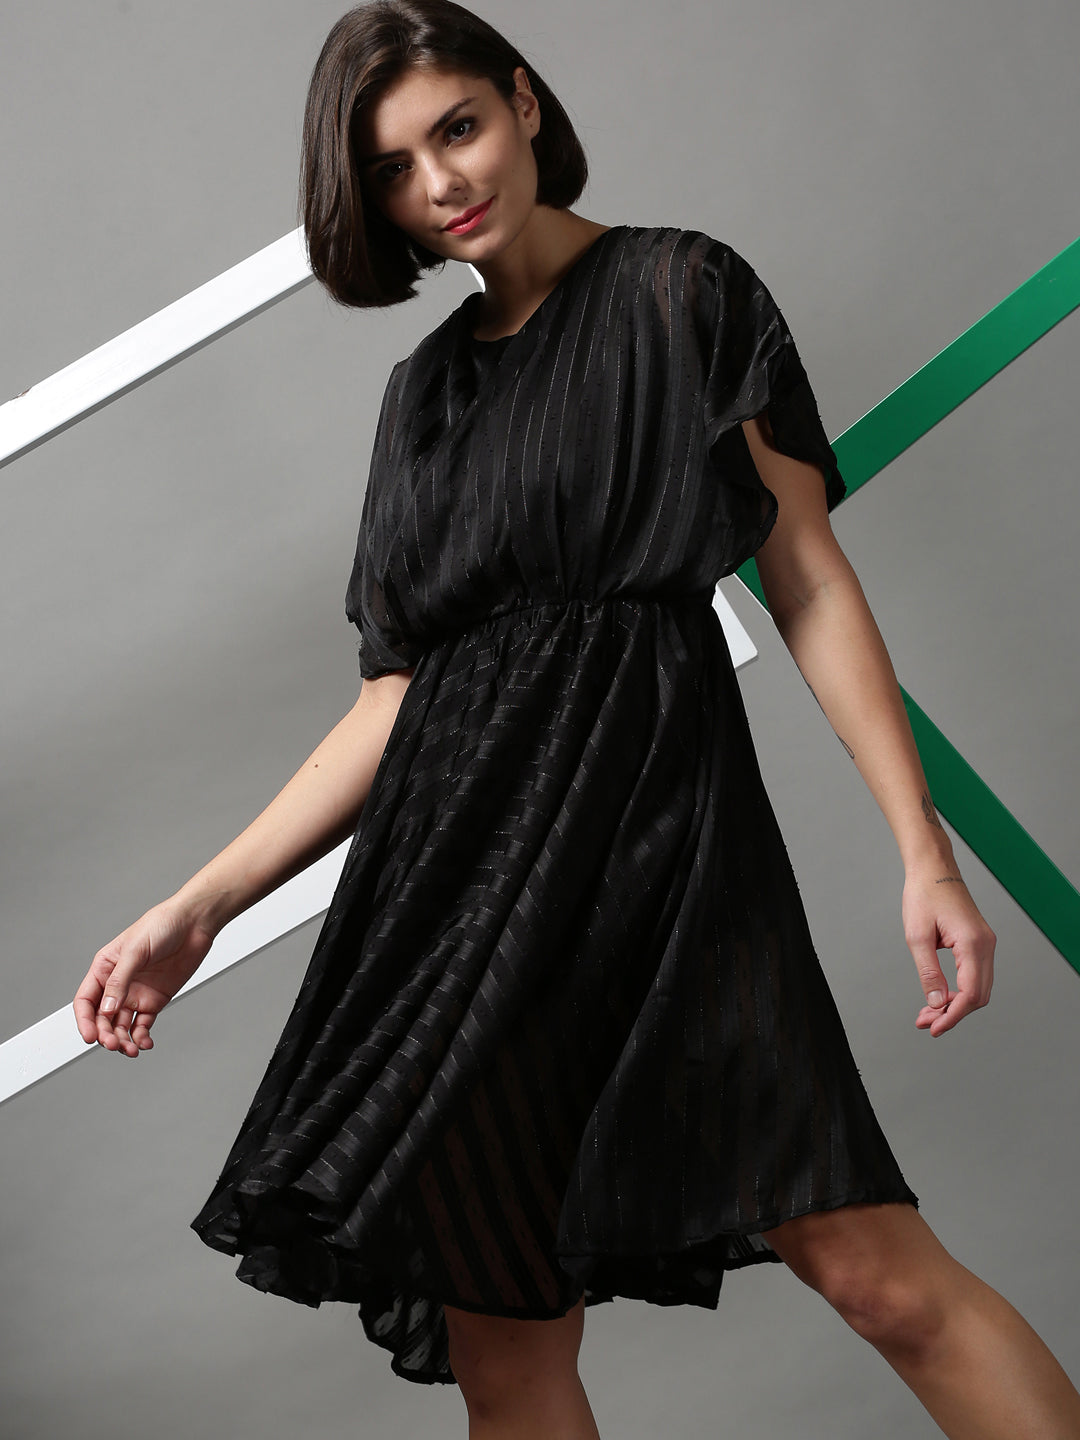 Women's Black Solid Fit and Flare Dress